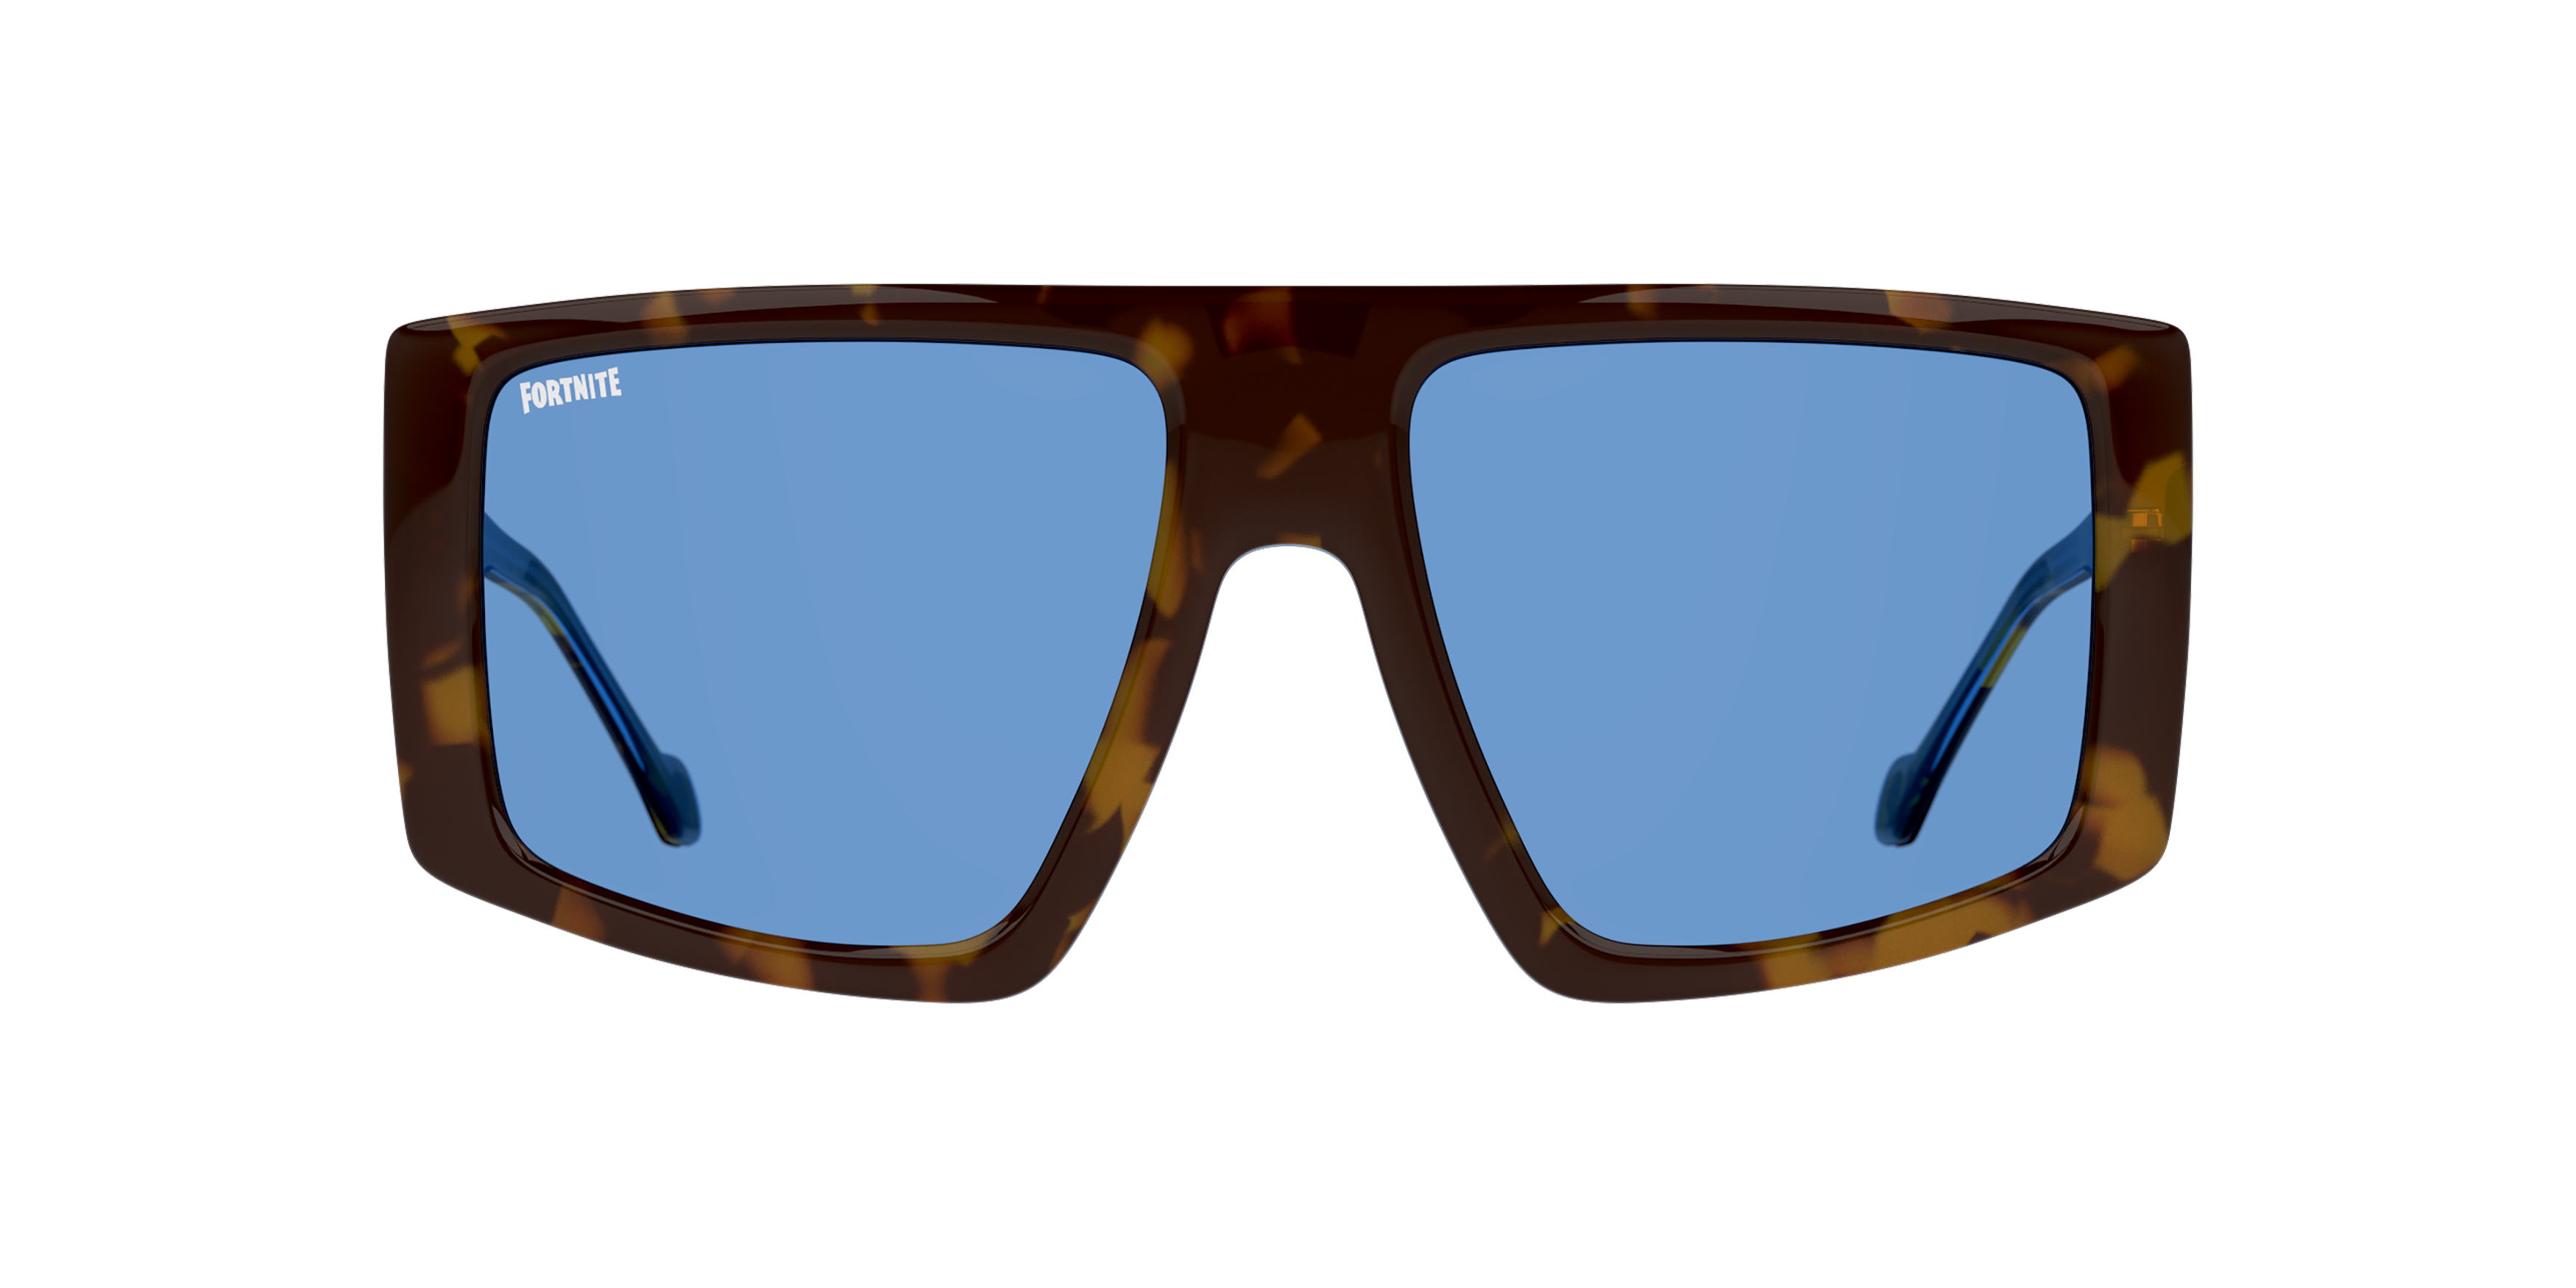 Front Fortnite with Unofficial UNSU0146 Sunglasses Blue / Havana